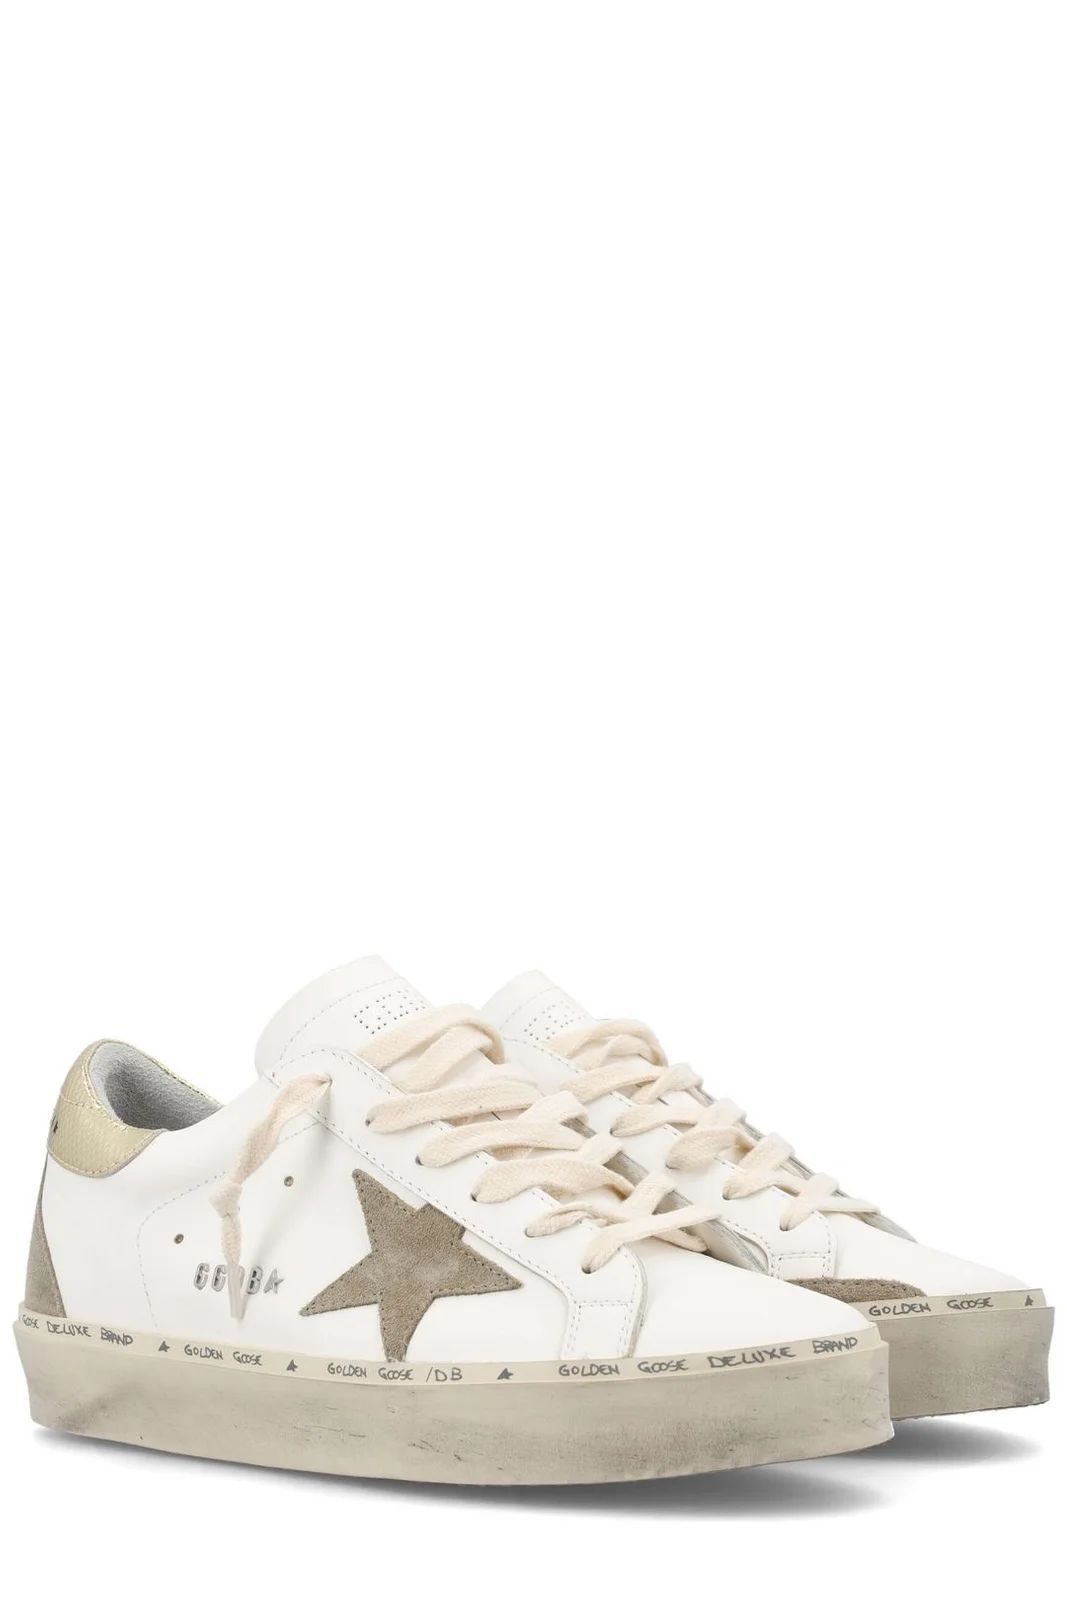 Golden Goose Deluxe Brand Hi Star Lace-Up Sneakers | Cettire Global